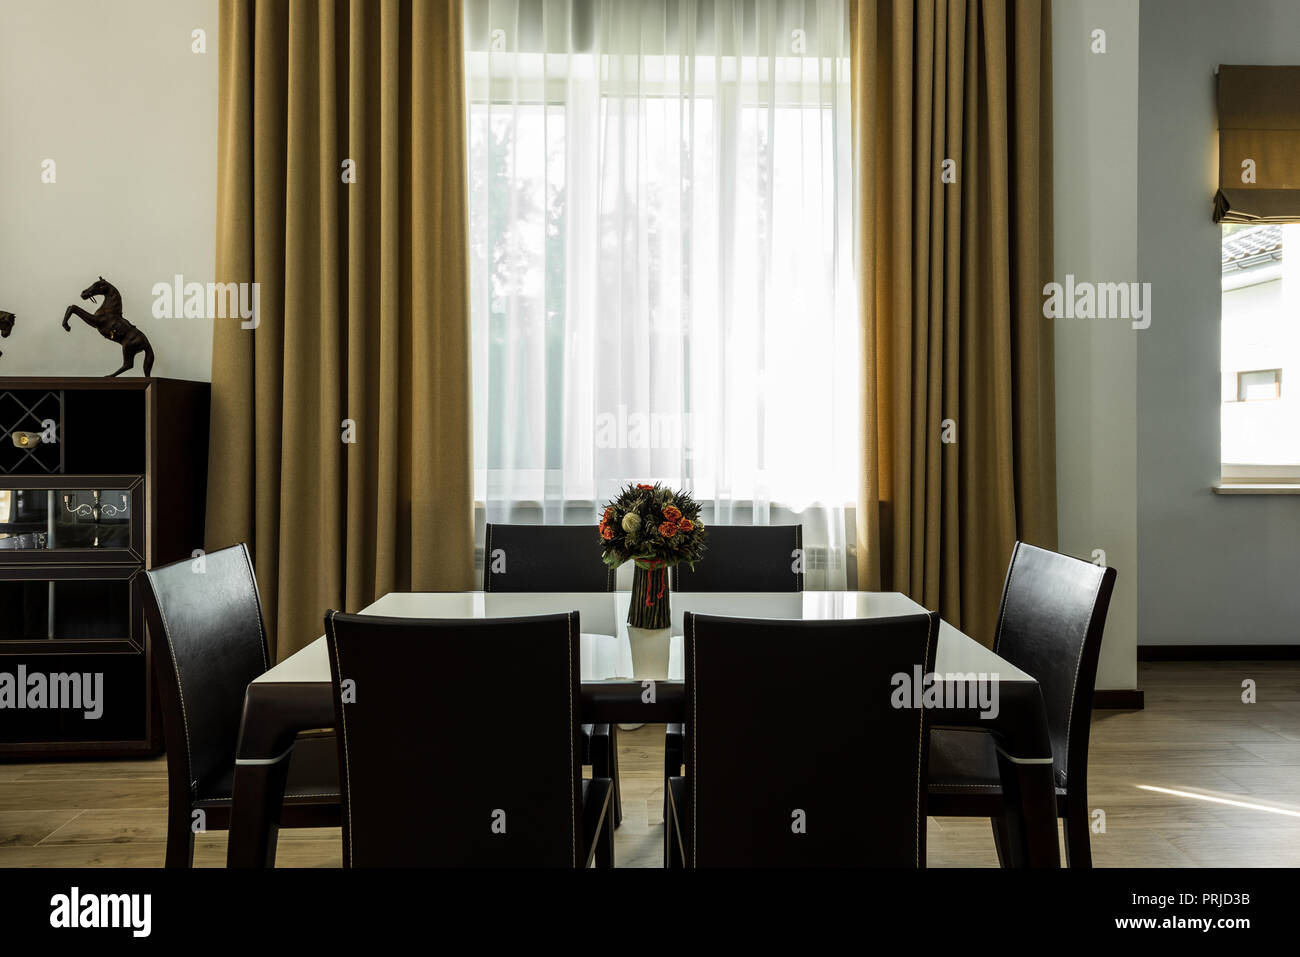 interior view of stylish dining room with table, chairs and big window Stock Photo